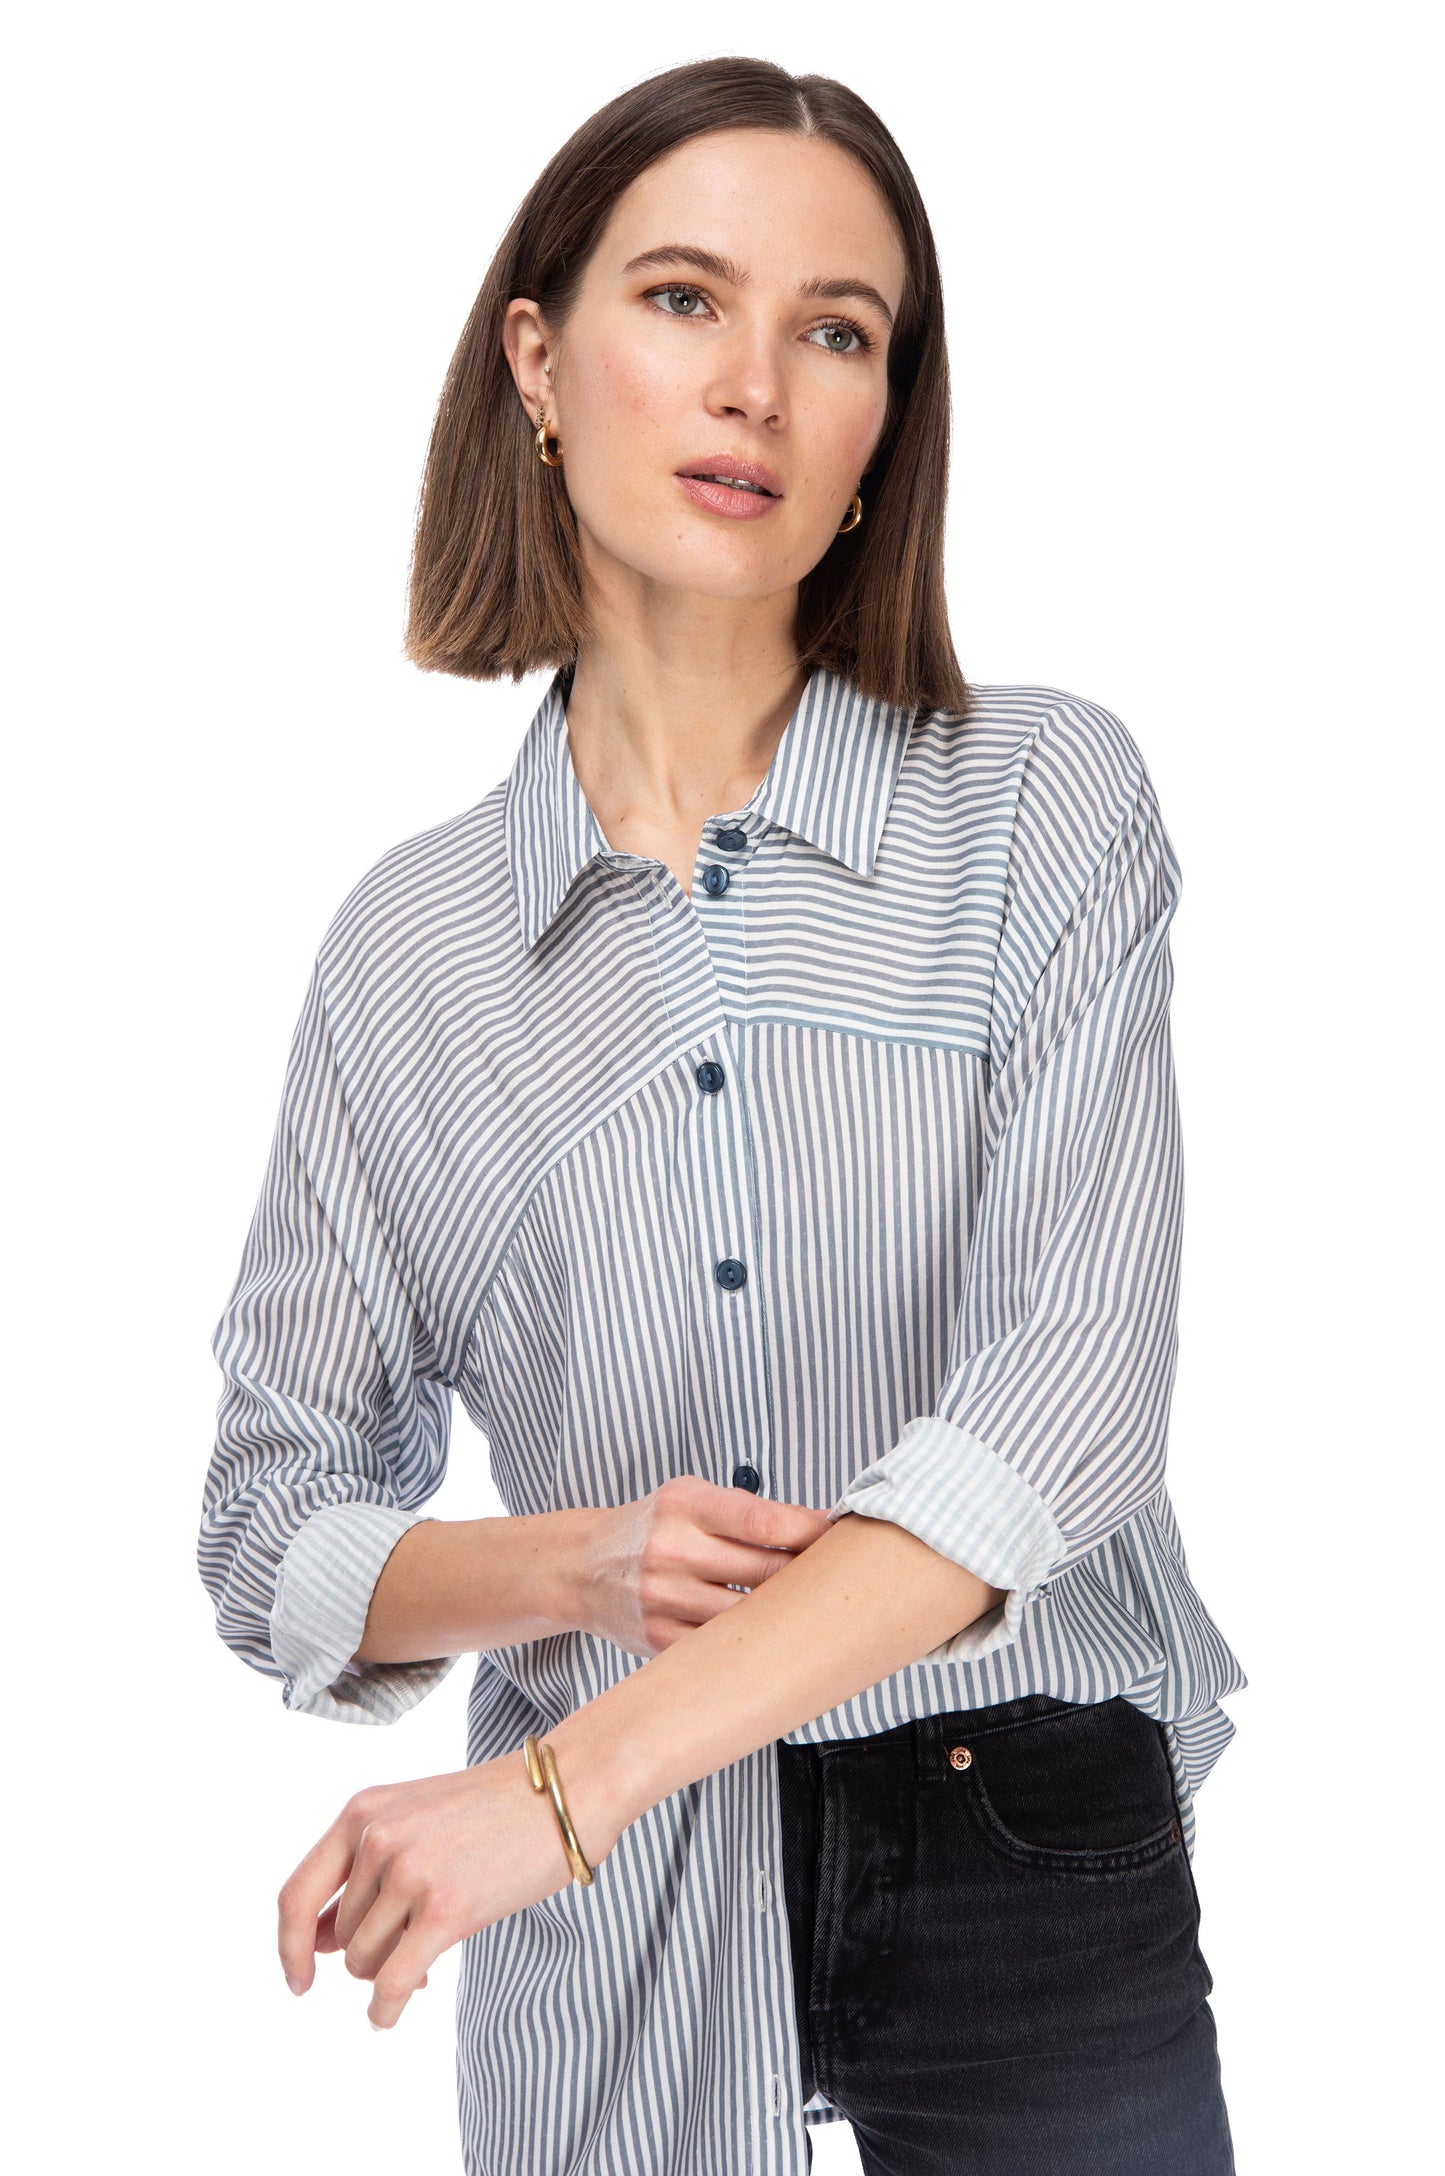 A woman with a subtle smile wearing a casual striped rayon LS BTTN DOWN TUNIC with rolled-up sleeves, accessorized with a simple bangle, posing against a white background. Brand Name: B Collection by Bobeau